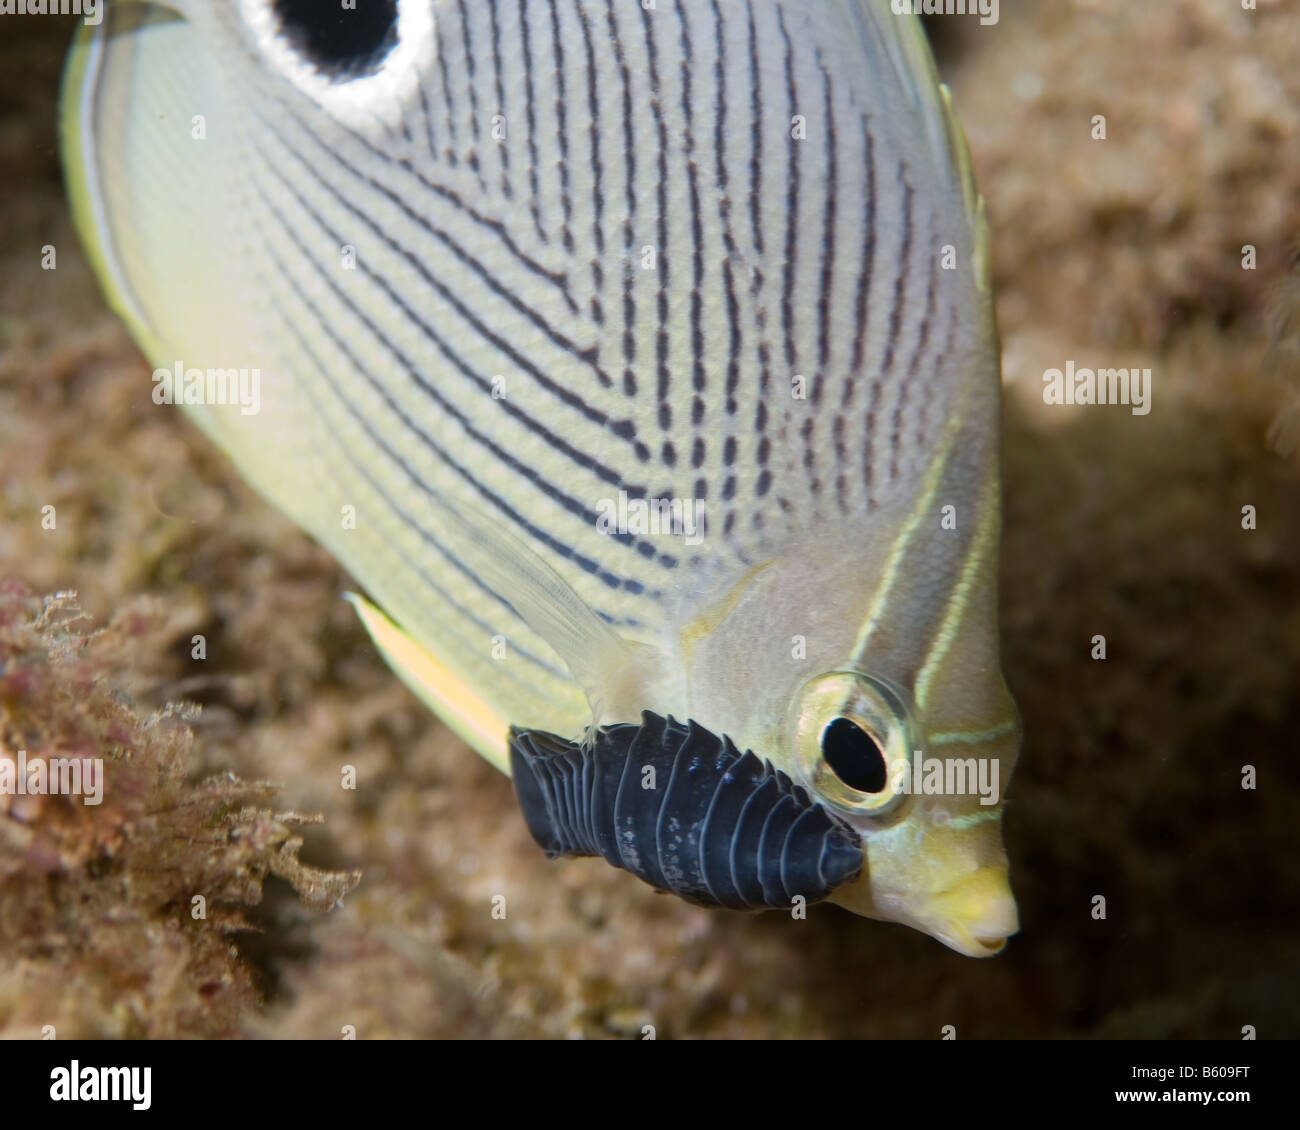 A Foureye Butterflyfish carries a hitchhiking parasitic Isopod along for the ride. Stock Photo